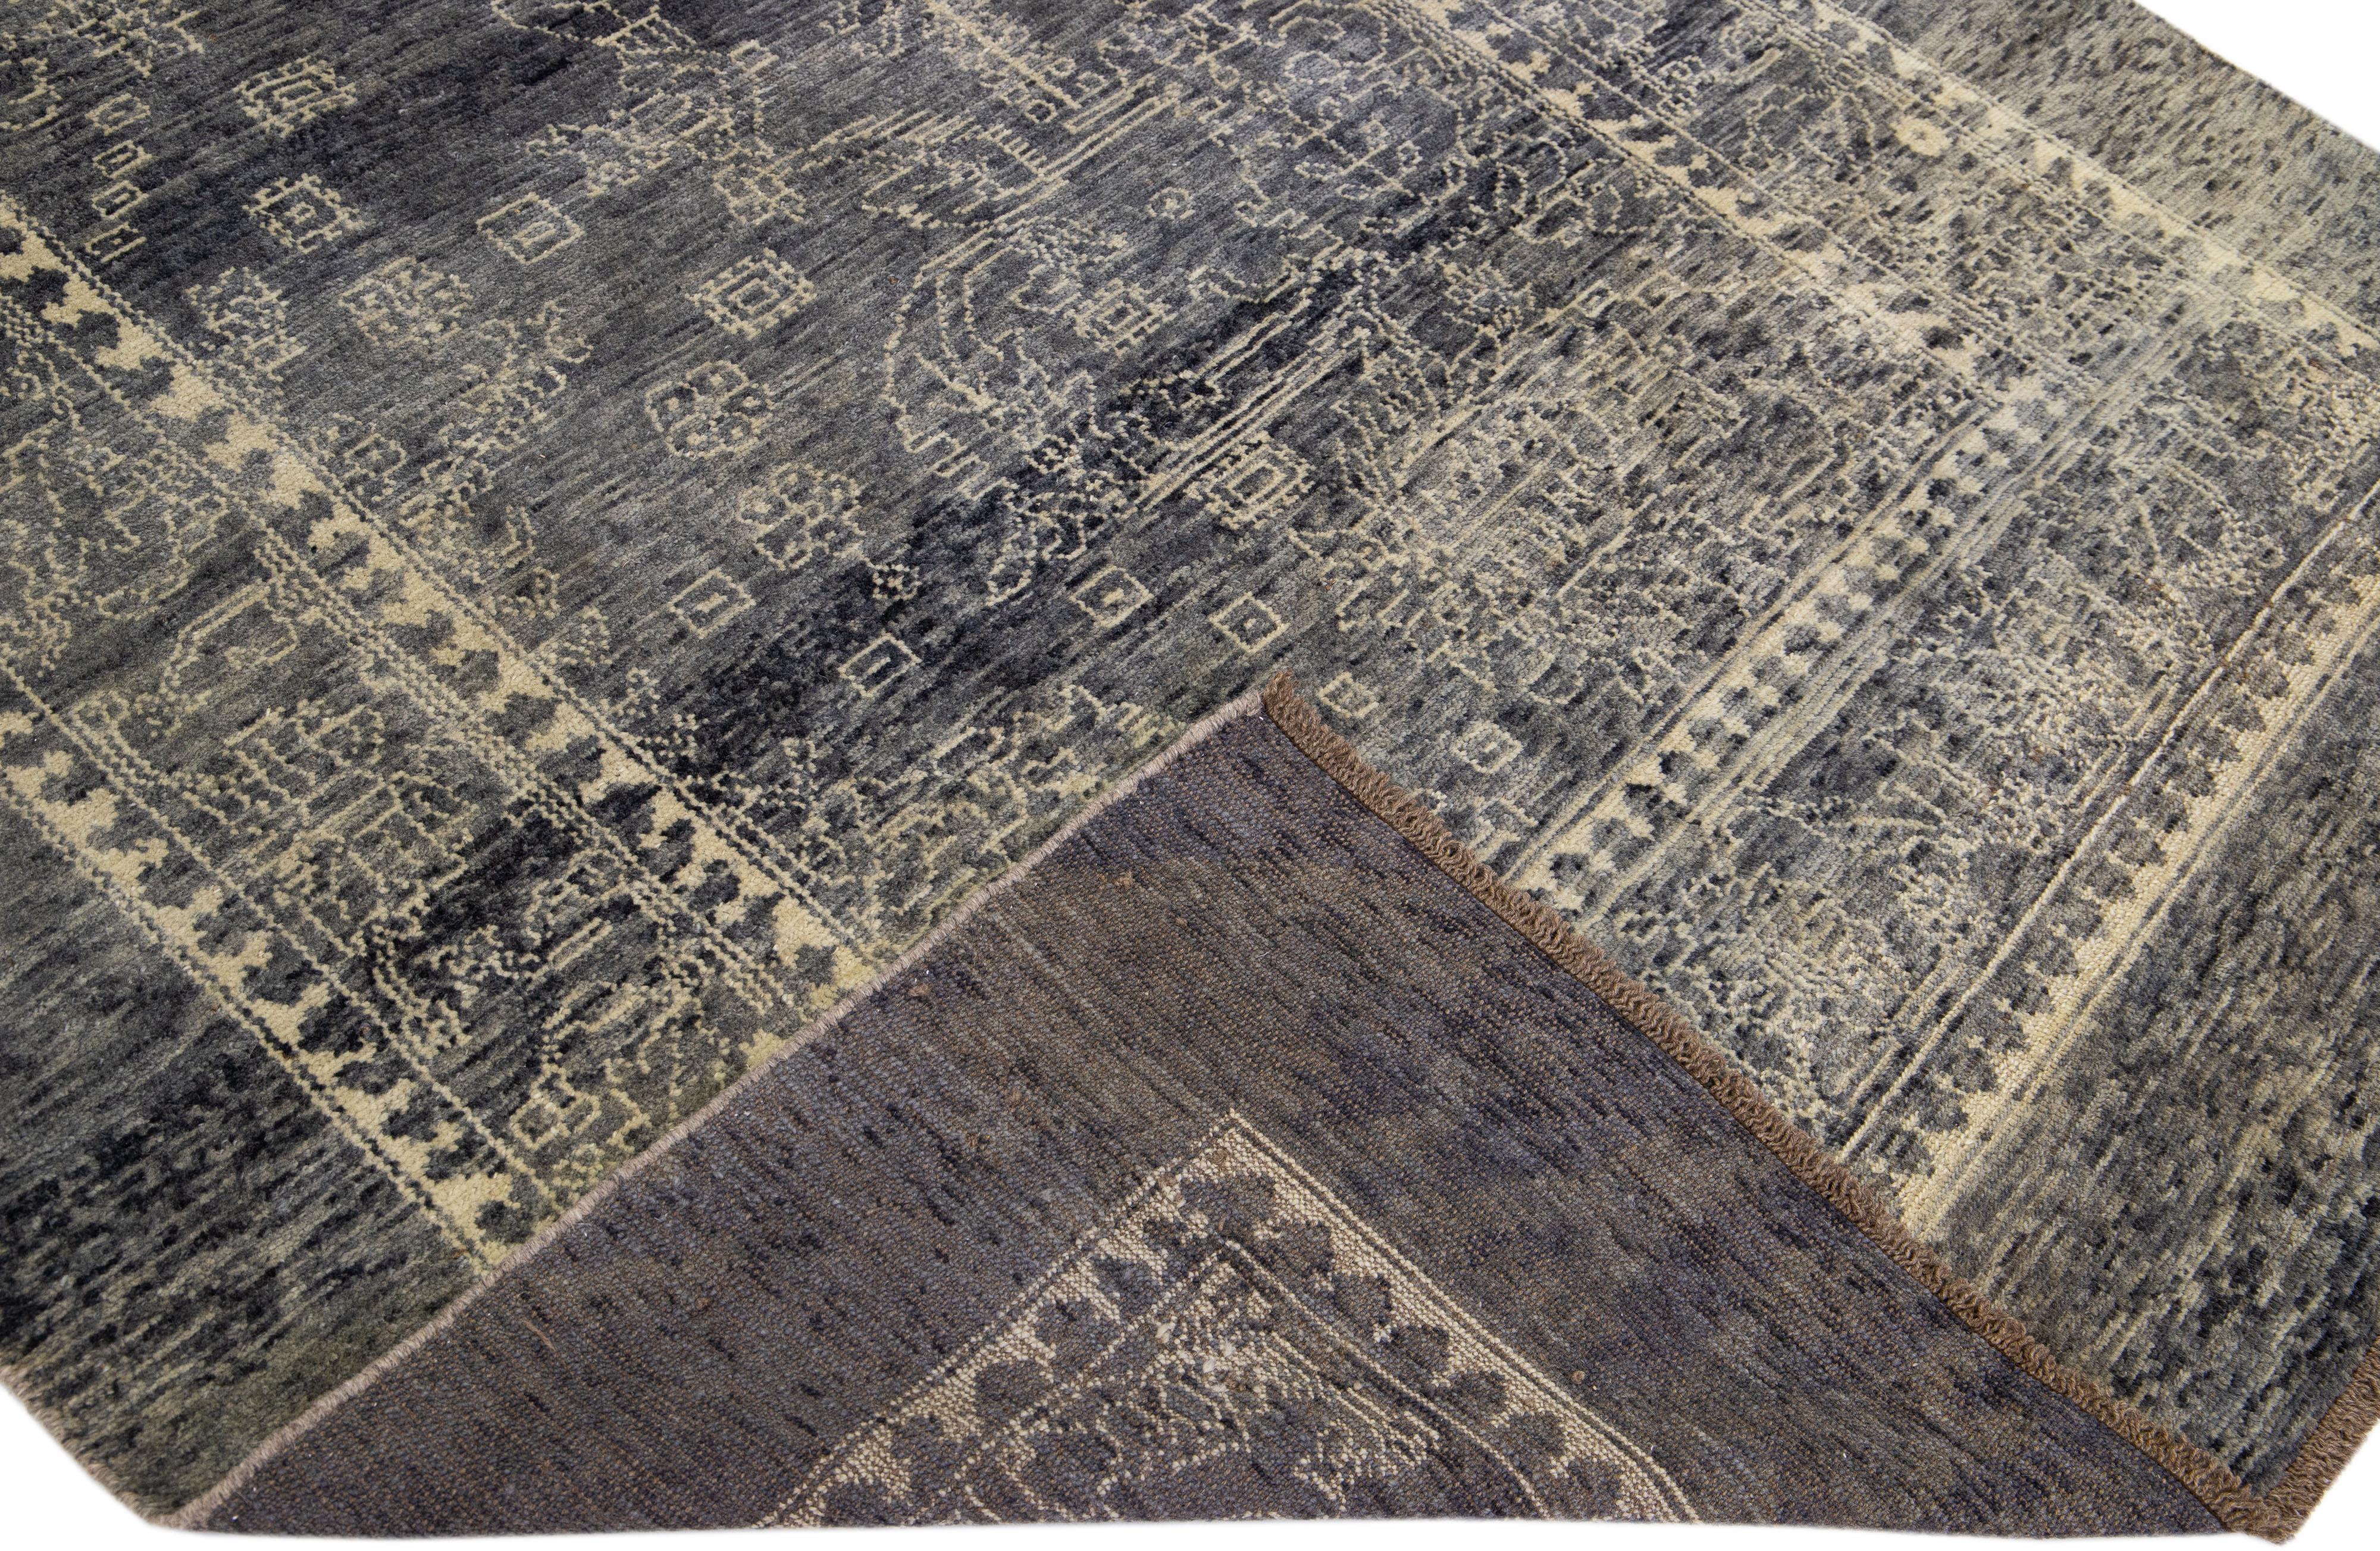 This Beautiful transitional handmade wool rug makes part of our Northwest collection and features a gray color field and beige accents in a gorgeous all-over geometric design.

This rug measures: 6'5